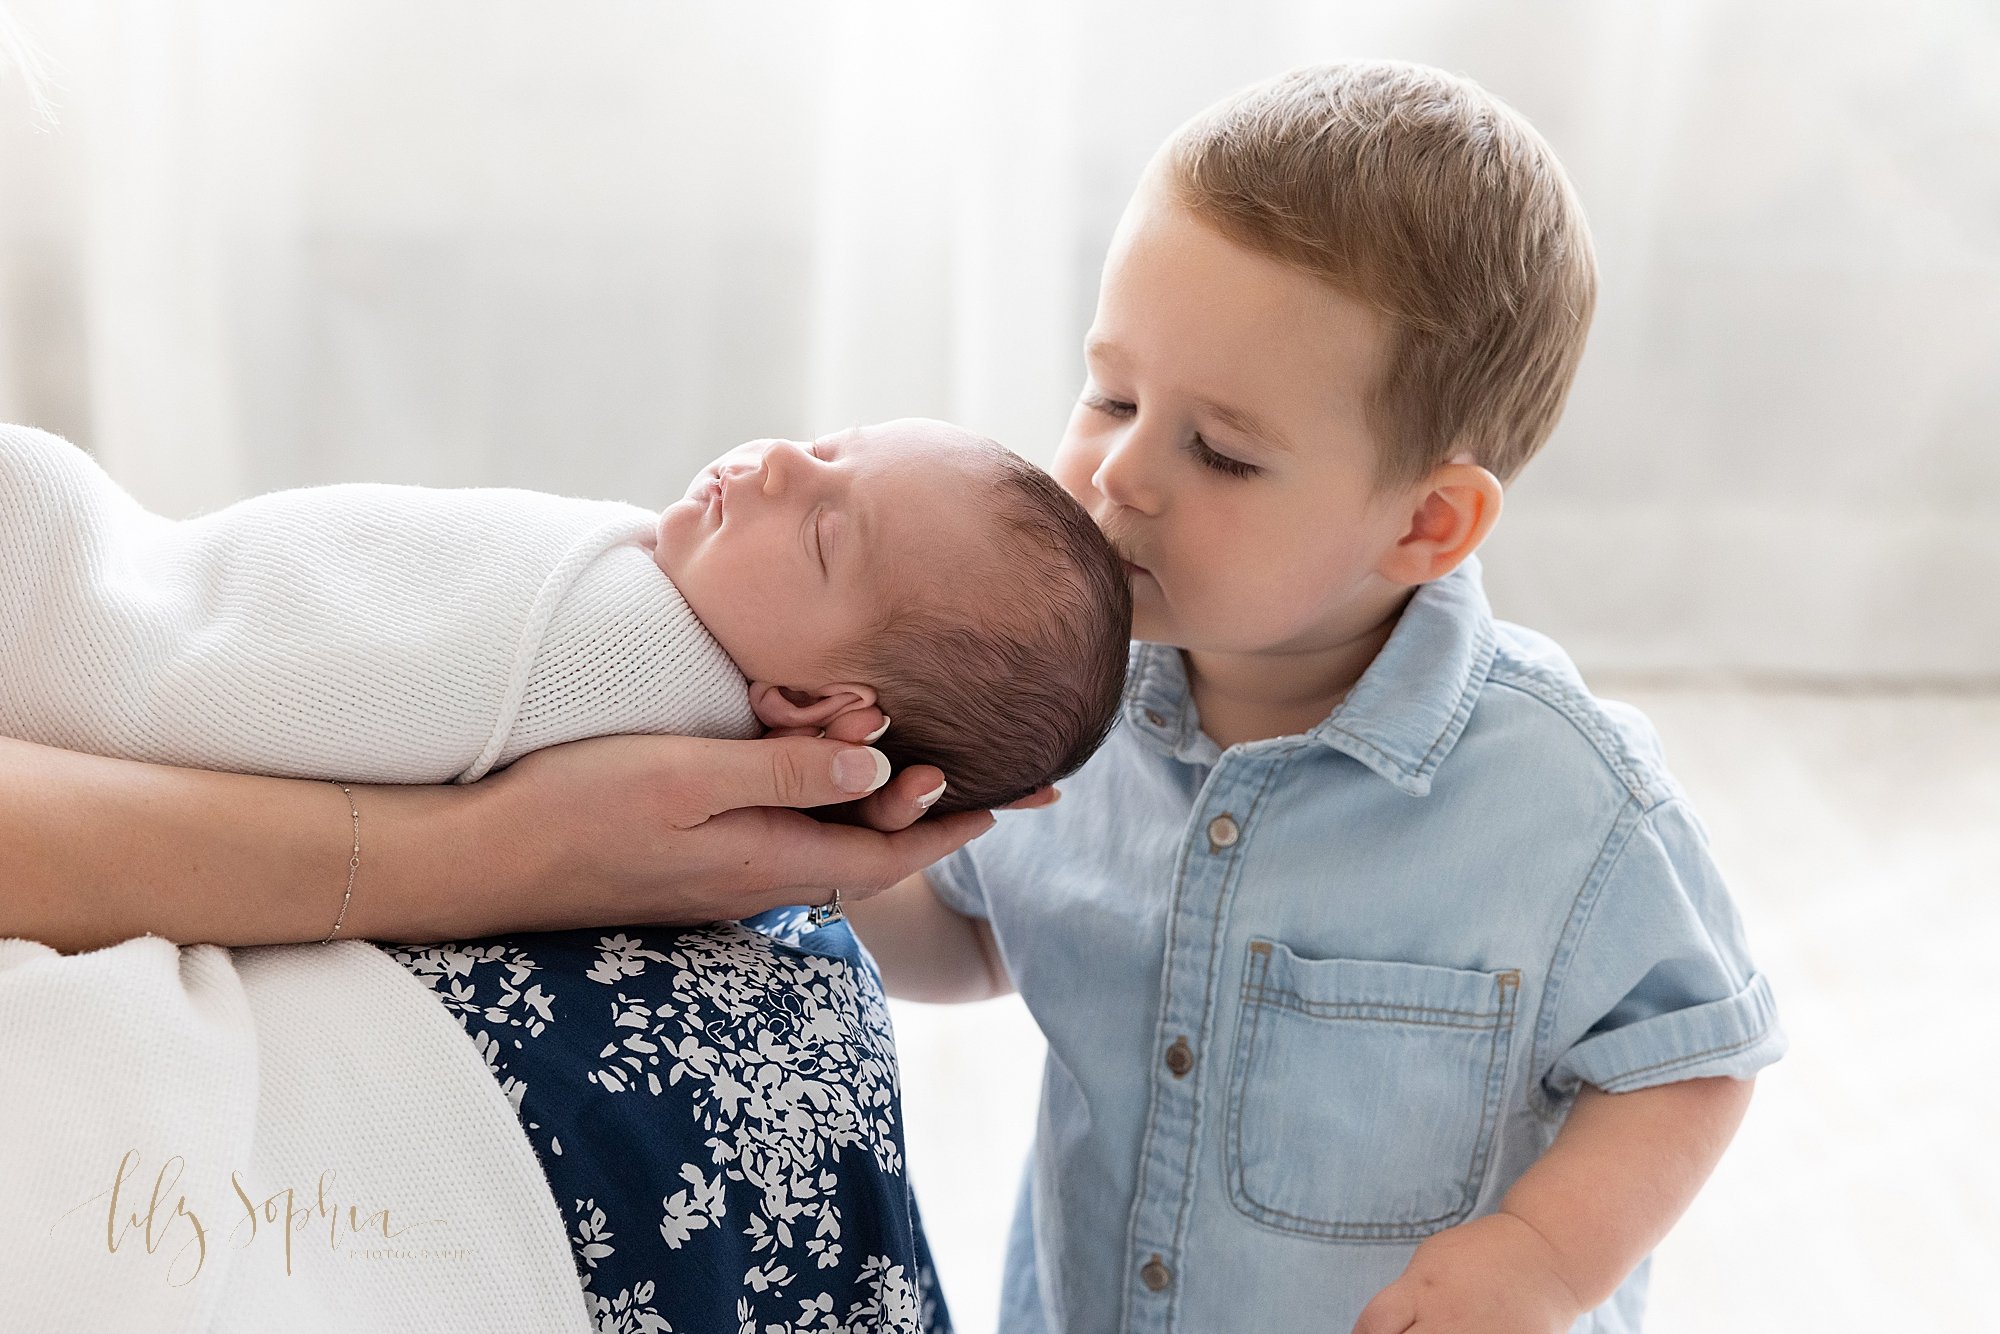  Precious newborn portrait of a sleeping newborn baby boy being held on his mother’s lap with his head in her hands as his toddler brother plants a kiss on the crown of his head taken in front of a window streaming natural light in a photography stud